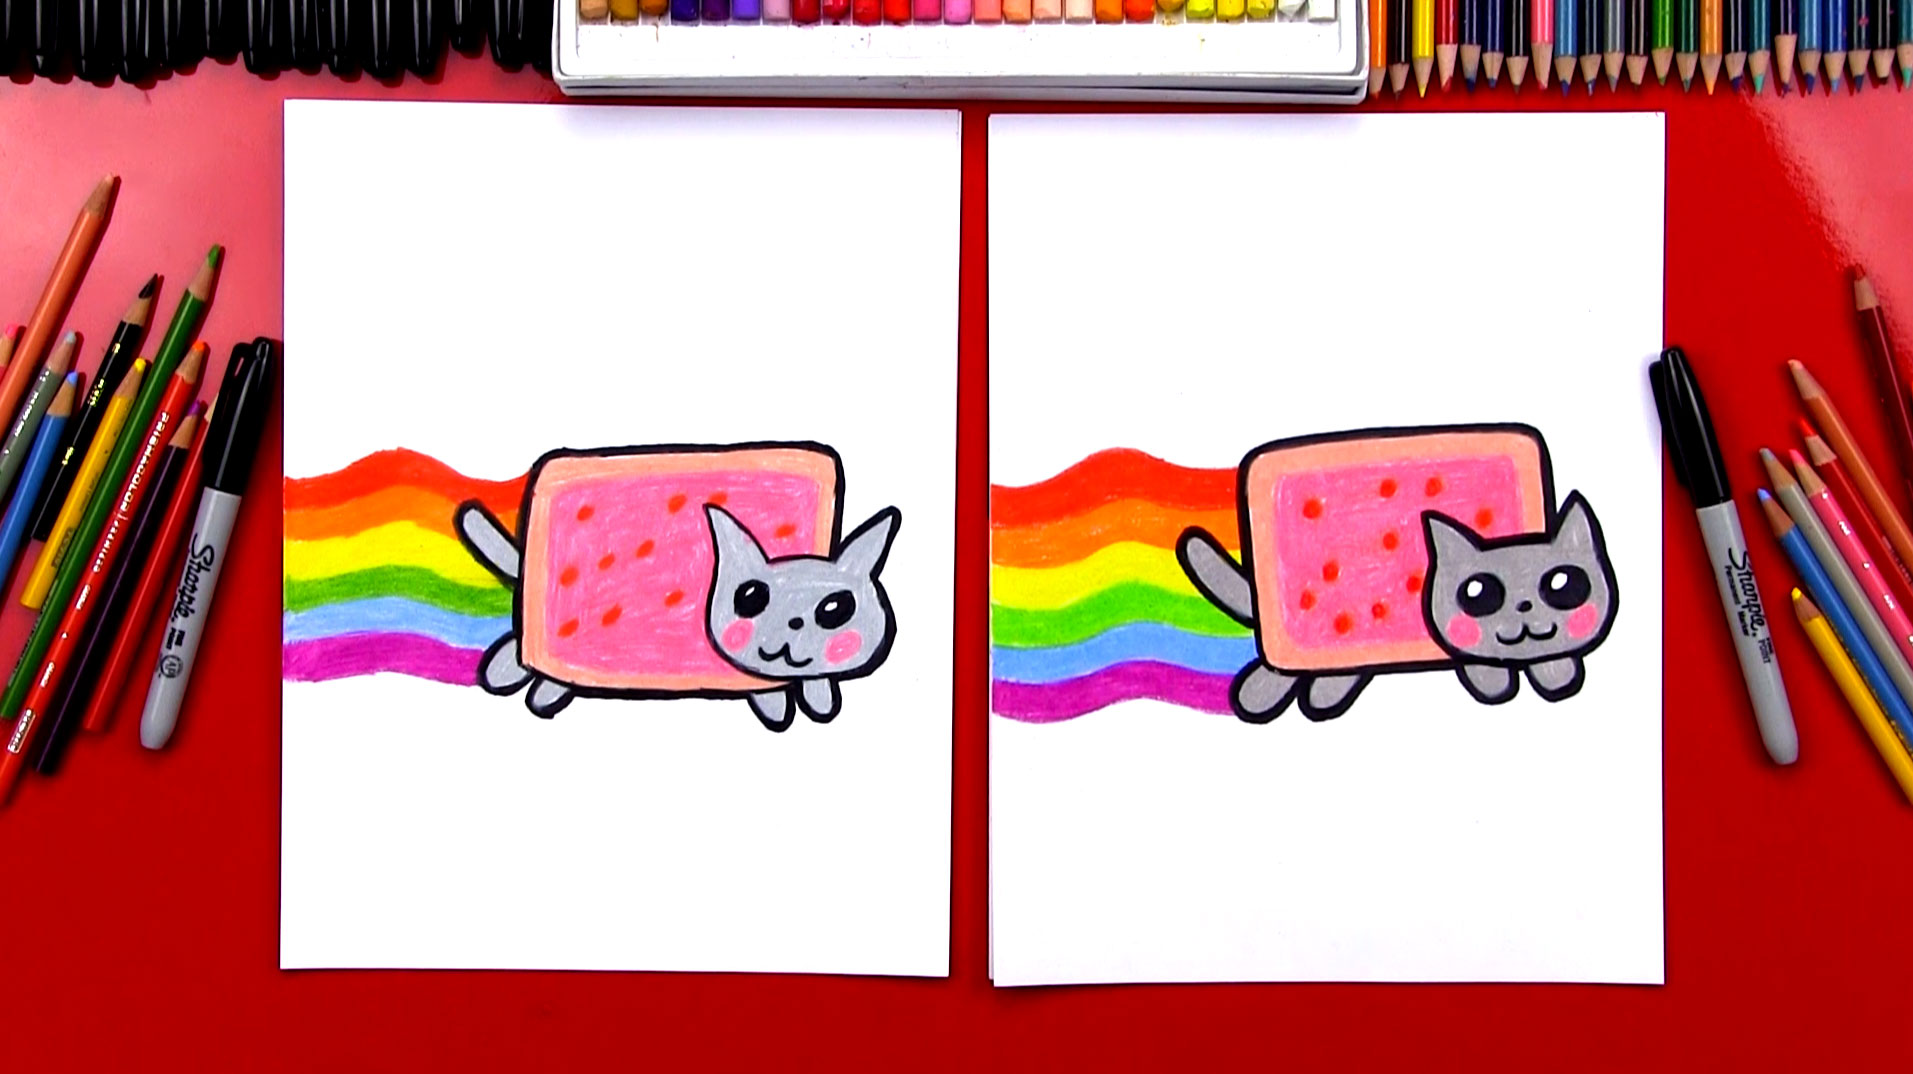 How To Draw The Nyan Cat - Art For Kids Hub